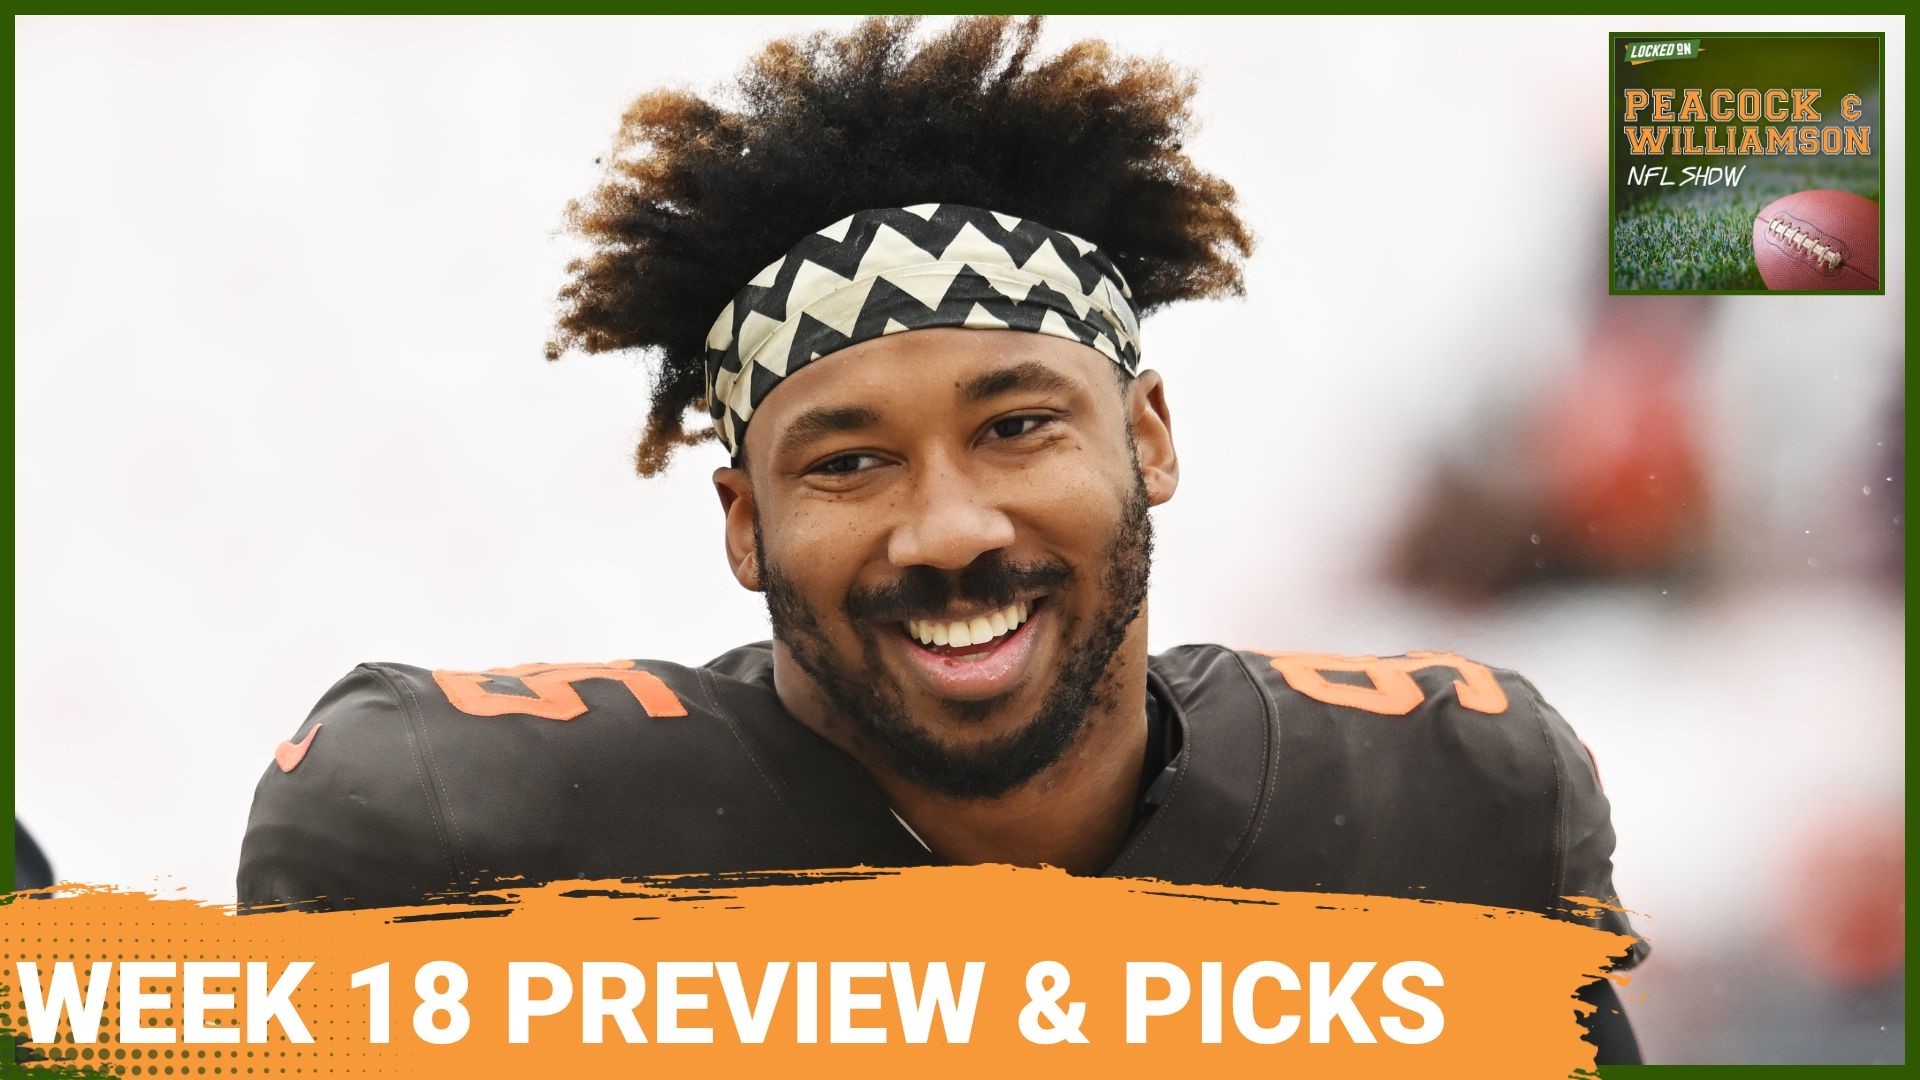 Brian Peacock and Matt Williamson share their picks for week 18 in the NFL, and where the rest of the season goes from here.